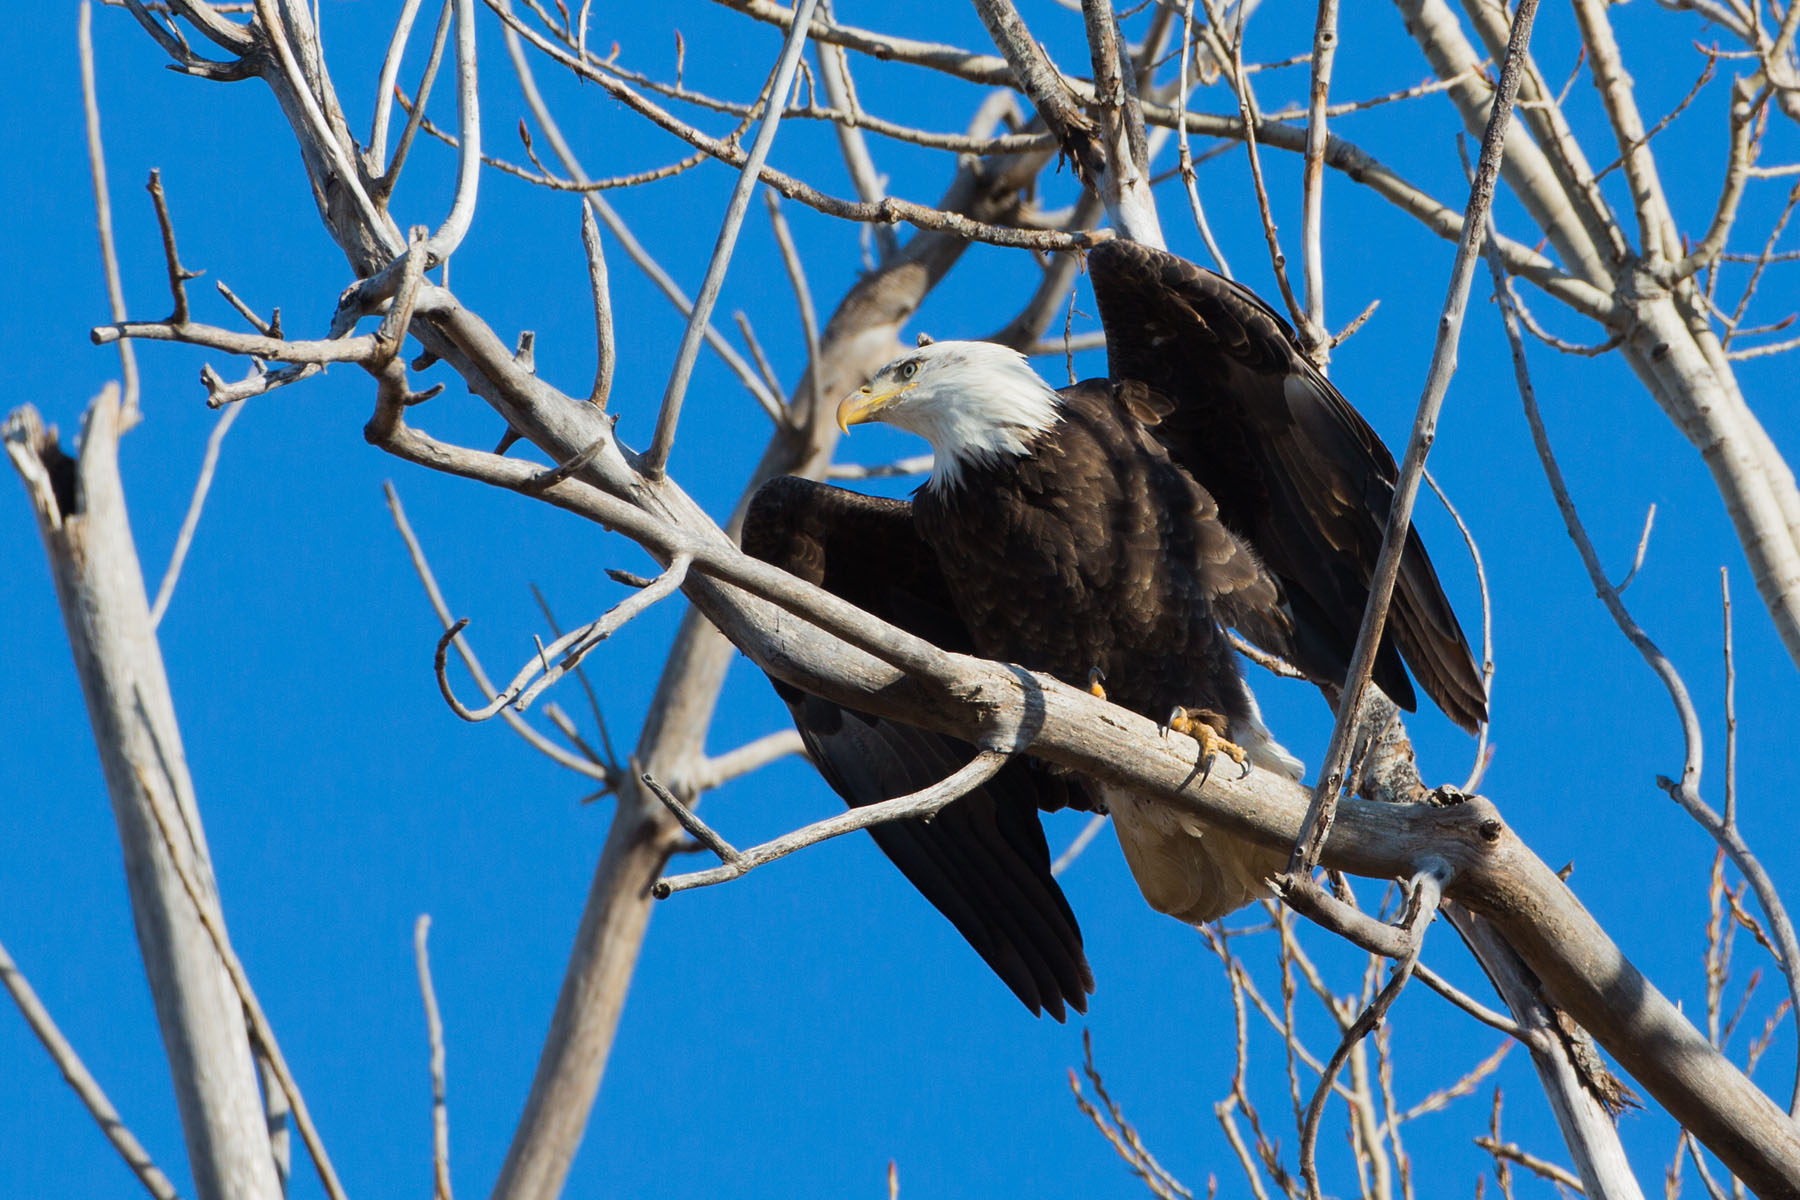 Bald Eagle, Loess Bluffs NWR, December 2019.  Click for next photo.